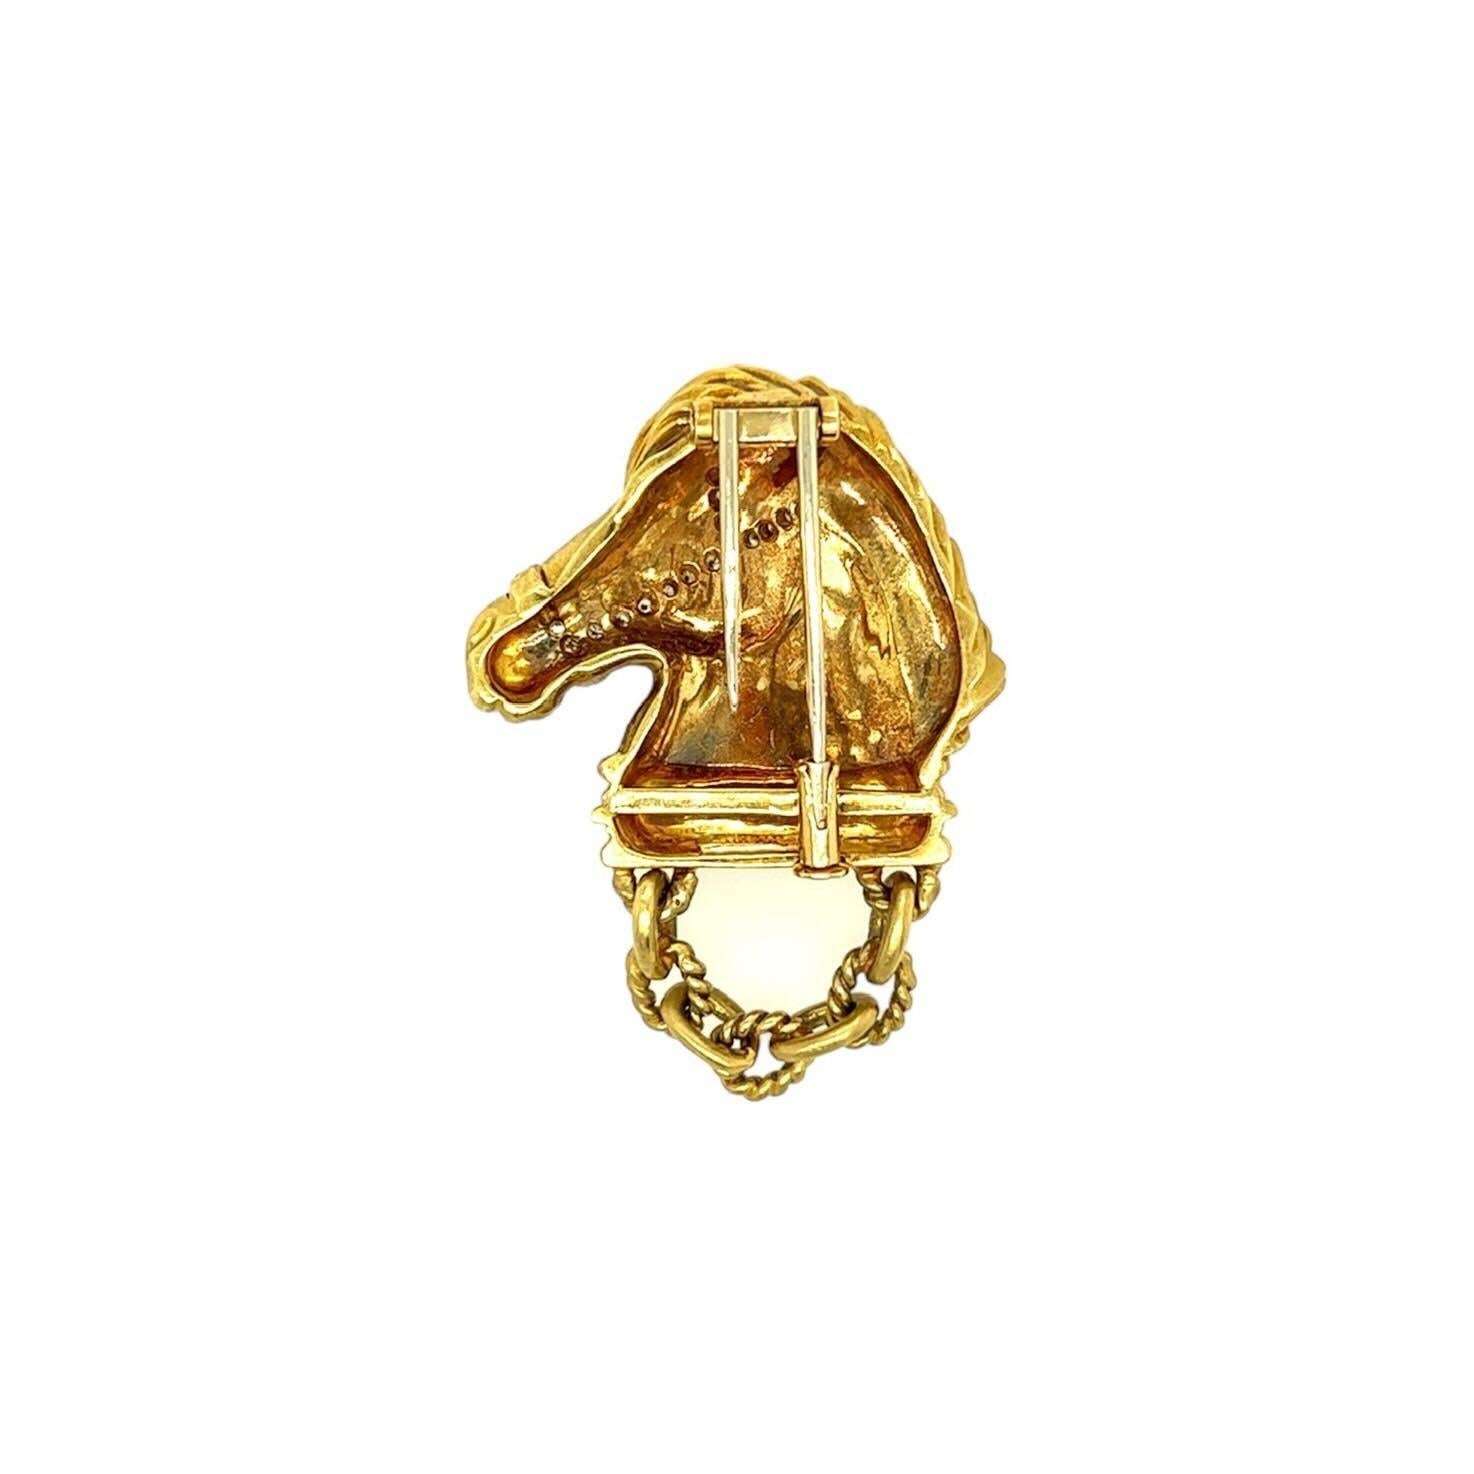 An 18 karat yellow gold and diamond brooch, Judith Ripka.  Fashioned as a matte gold horse head in profile, the bridle set with twenty two brilliant cut diamonds, suspending a short length of chain. Total diamond weight approximately 0.40 carat. 